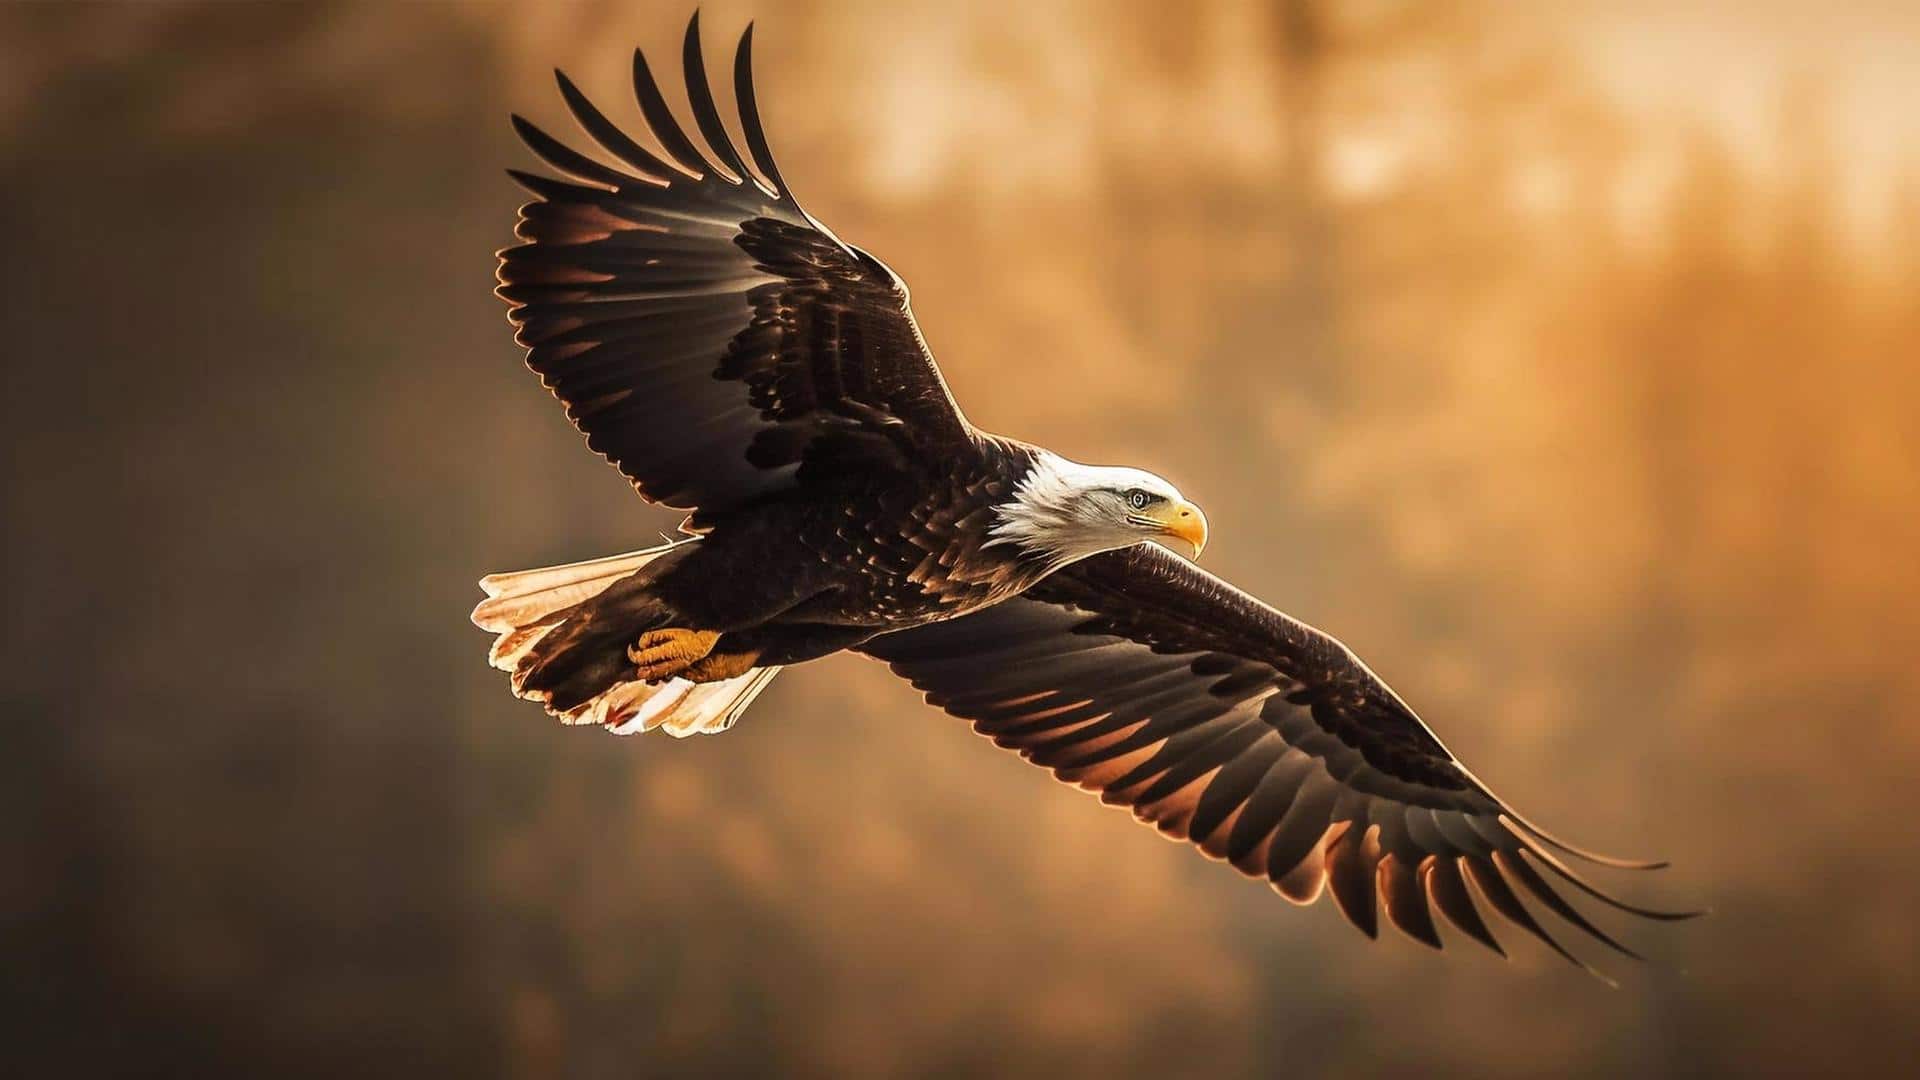 5 amazing facts you probably didn't know about eagles